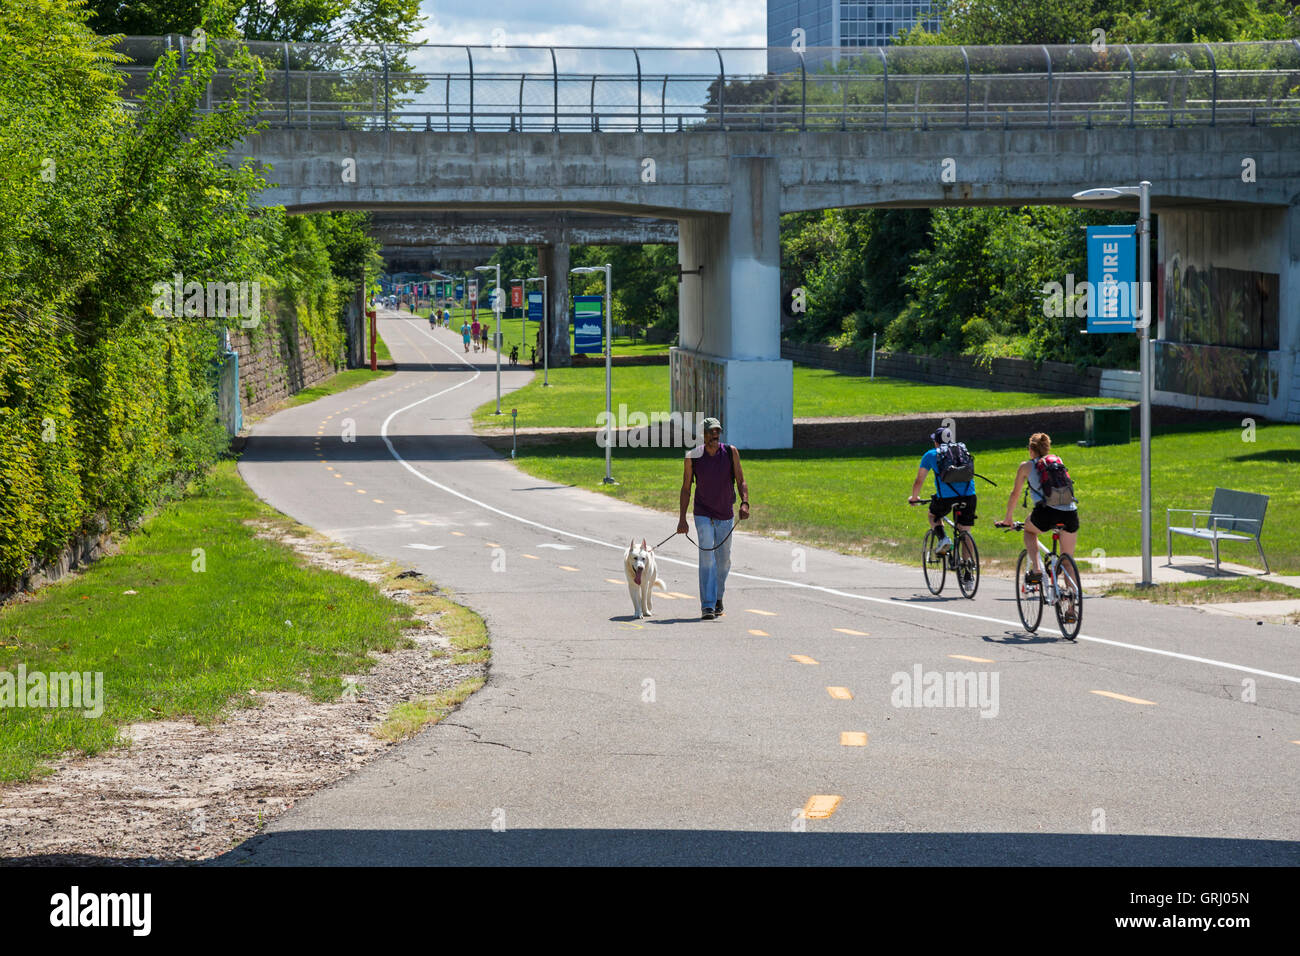 Detroit, Michigan - The Dequindre Cut Greenway, a hiking/biking path, follows the route of the former Grand Trunk Railroad. Stock Photo